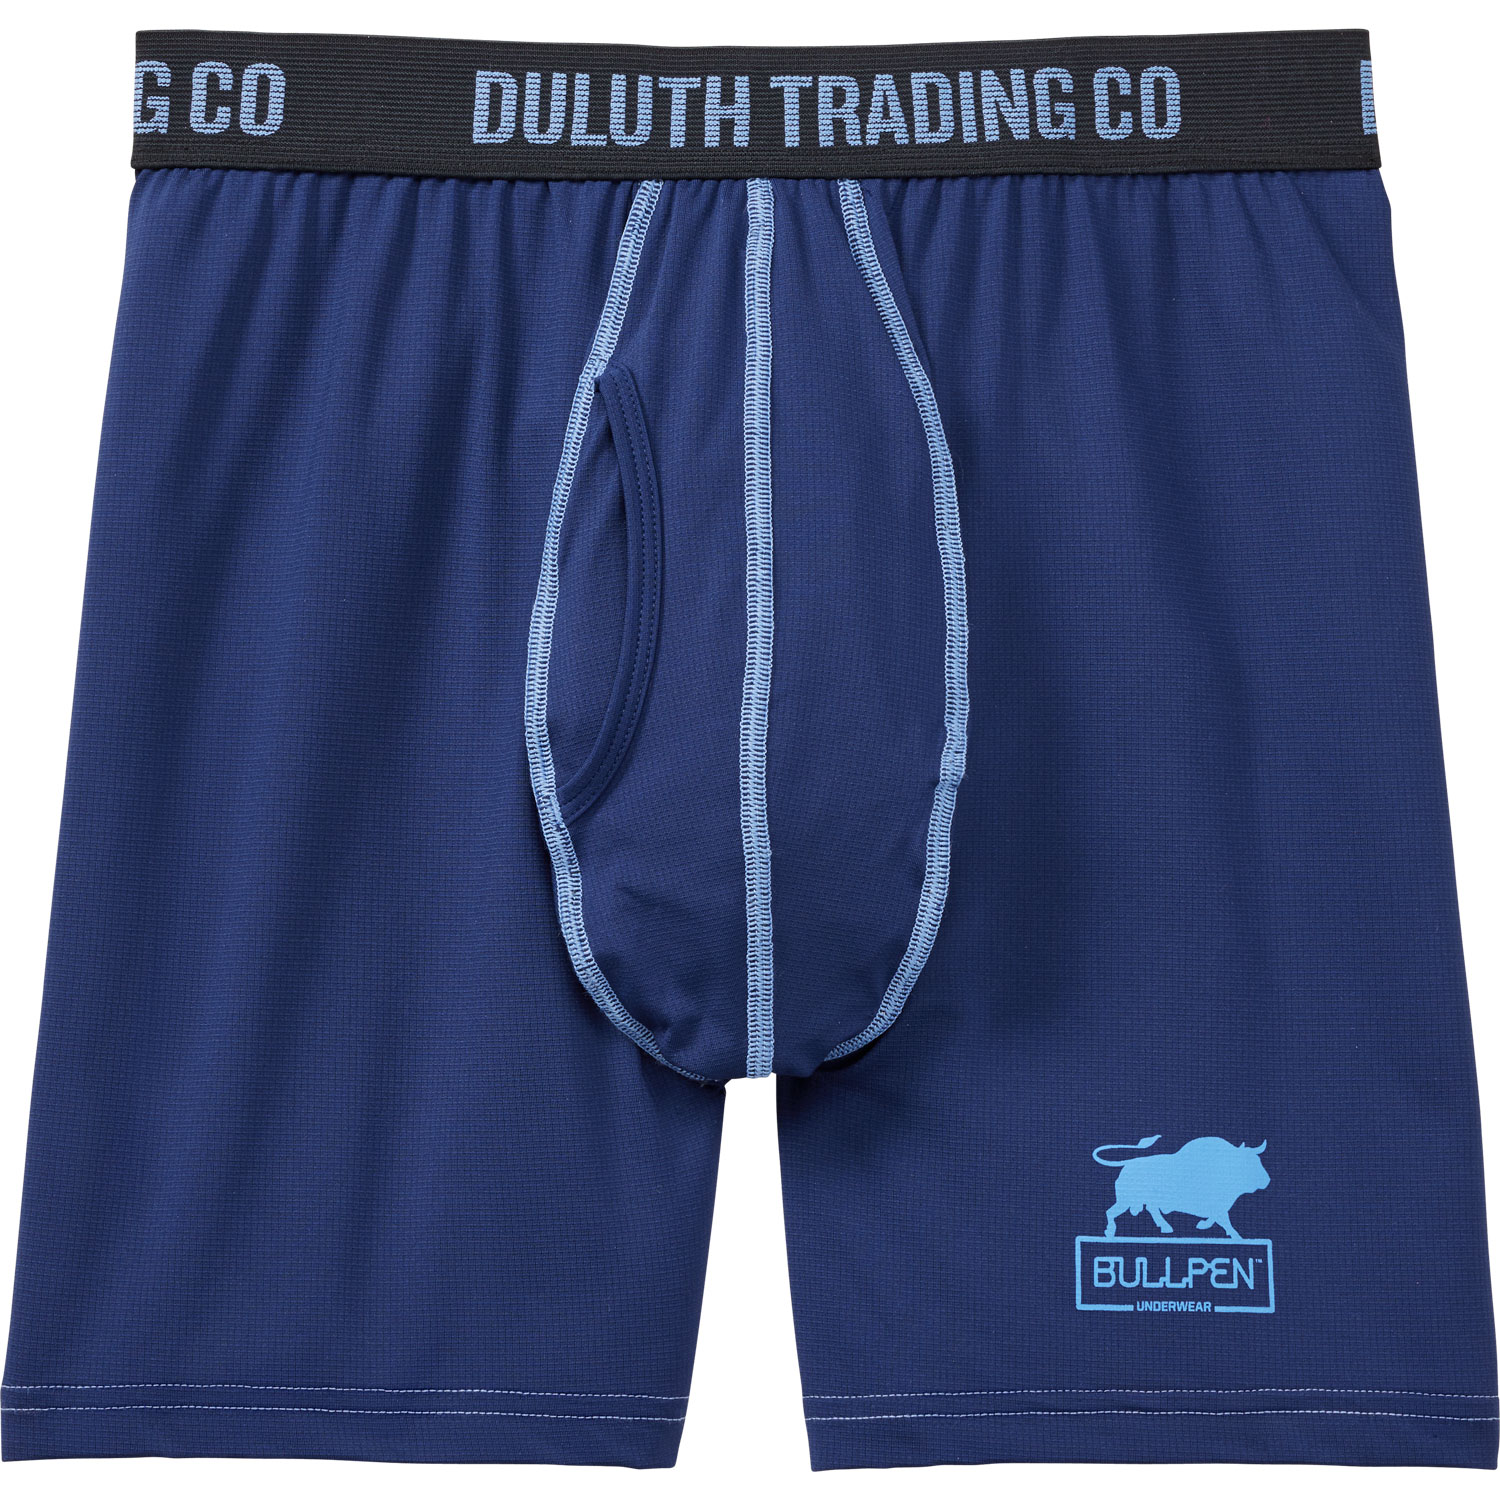 Duluth Trading Company - It's the final matchup – a competition of underwear  titans that crowns just one winner! For Armachillo® Bullpen®, they're going  to have to play it cool all 4